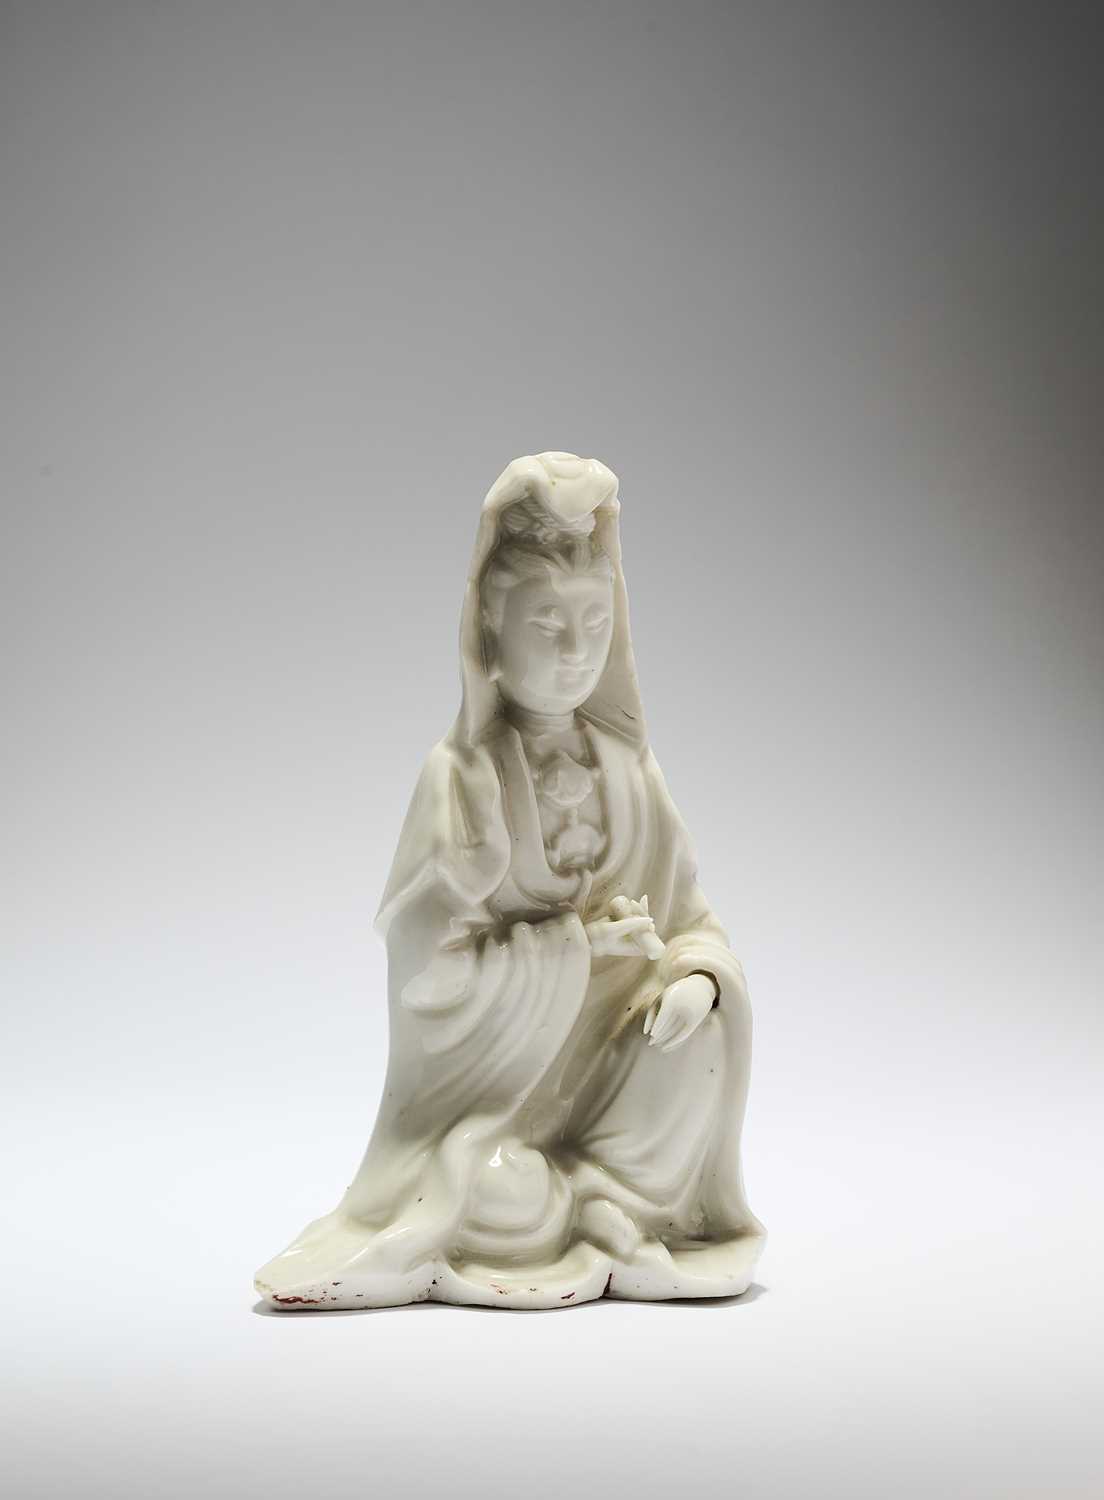 Lot 11 - A CHINESE DEHUA FIGURE OF GUANYIN, LATER QING DYNASTY (1644-1911)